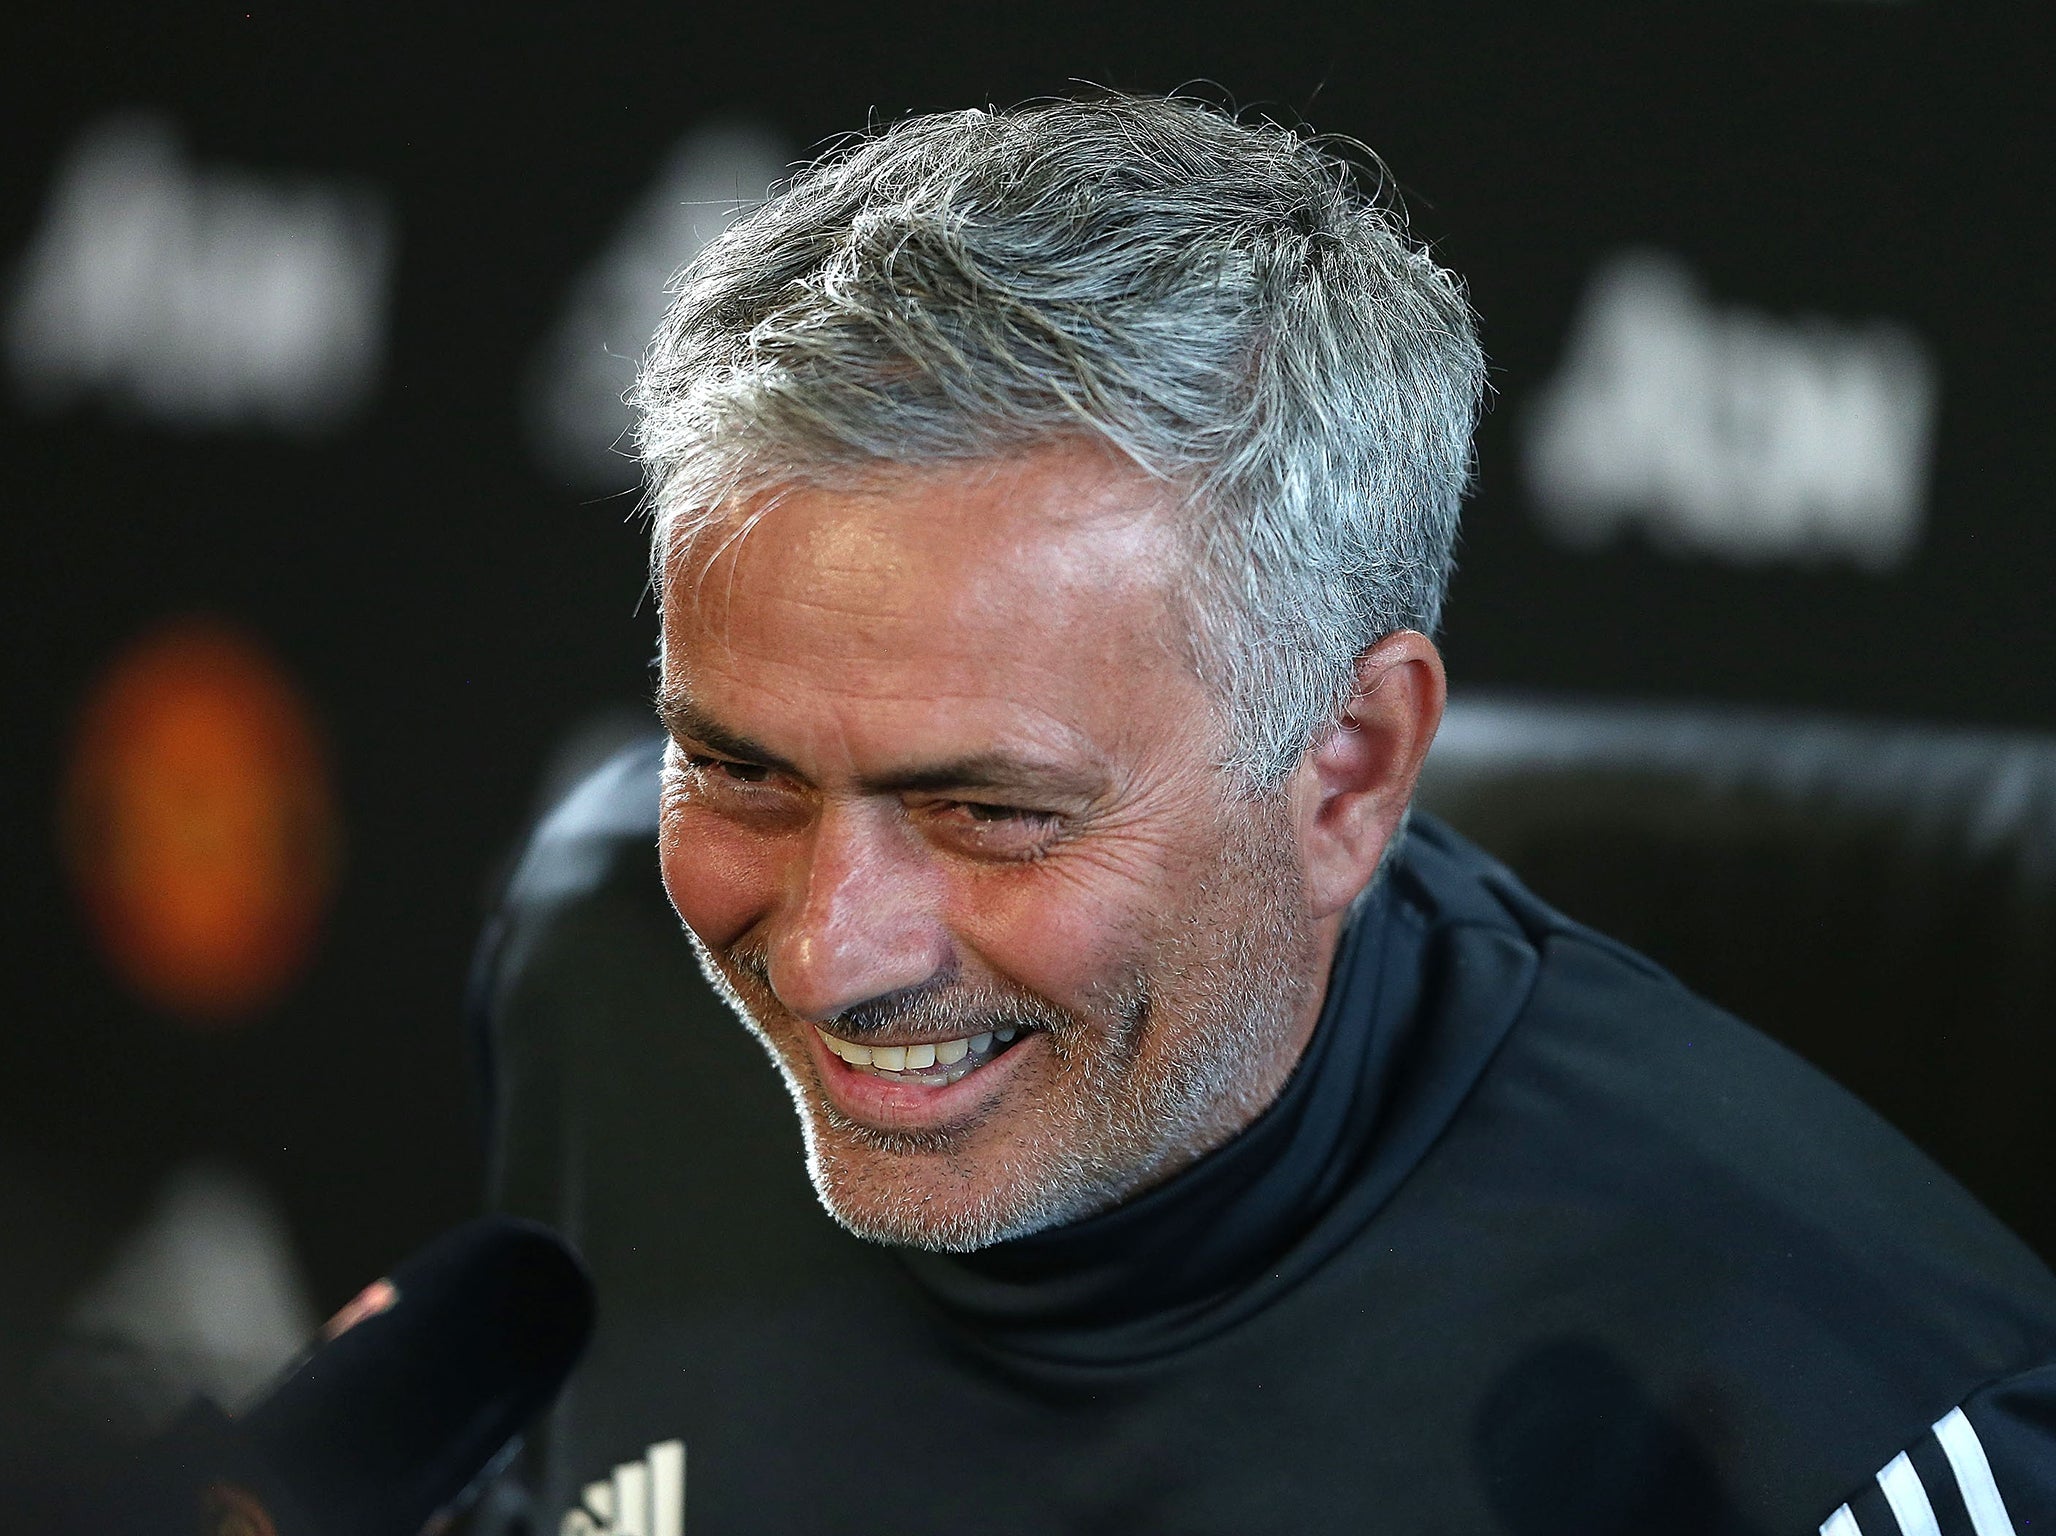 Mourinho added that he was delighted with his new side's transfer business